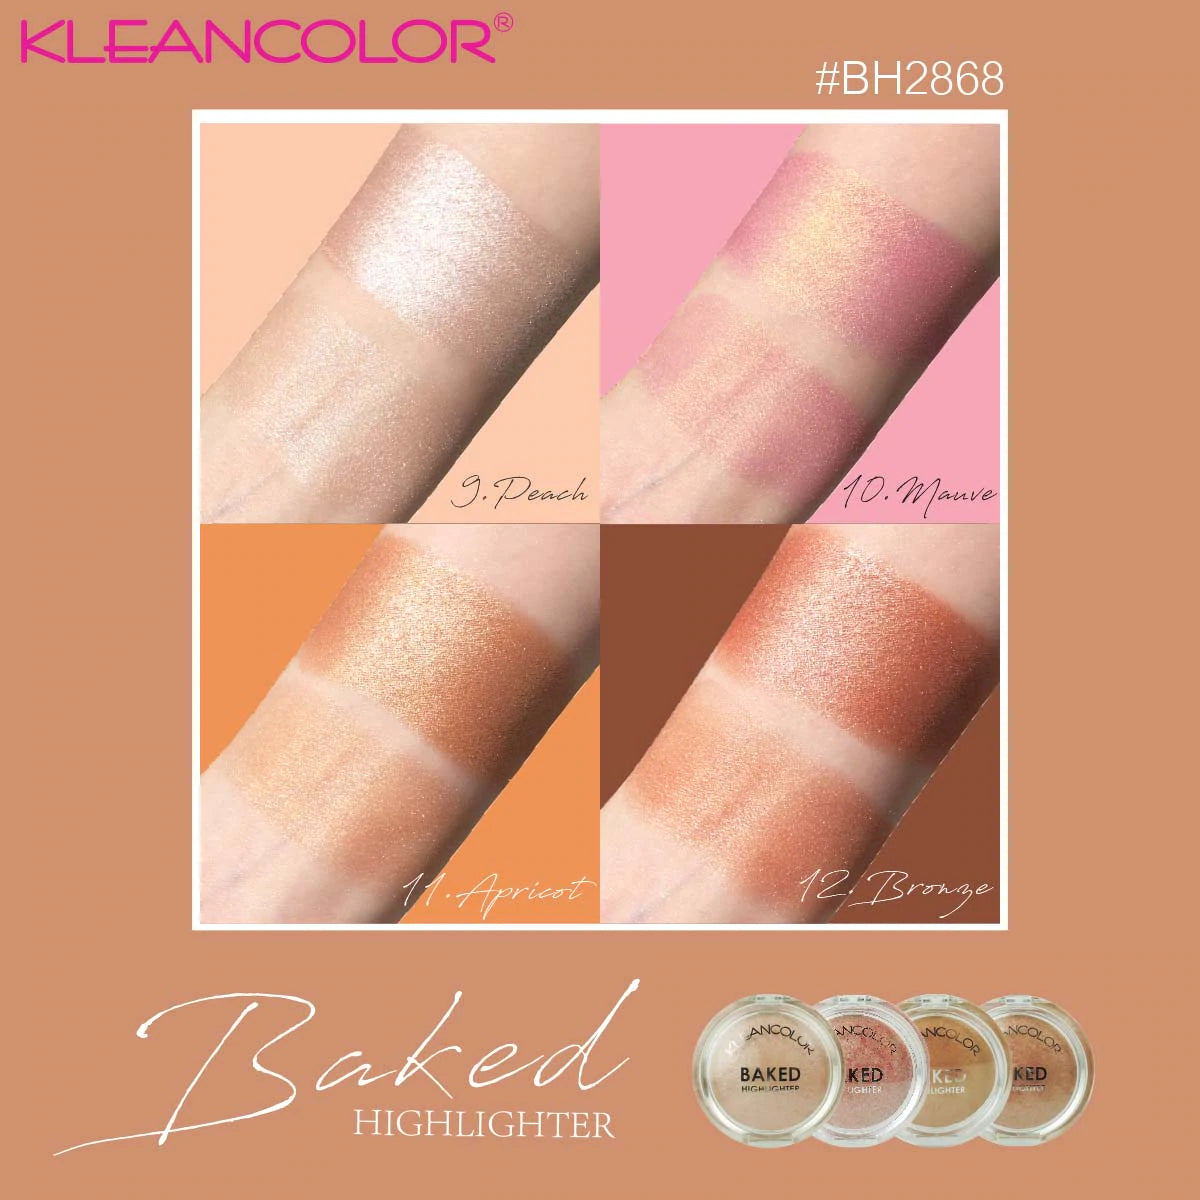 Kleancolor - Baked Highlighter Apricot